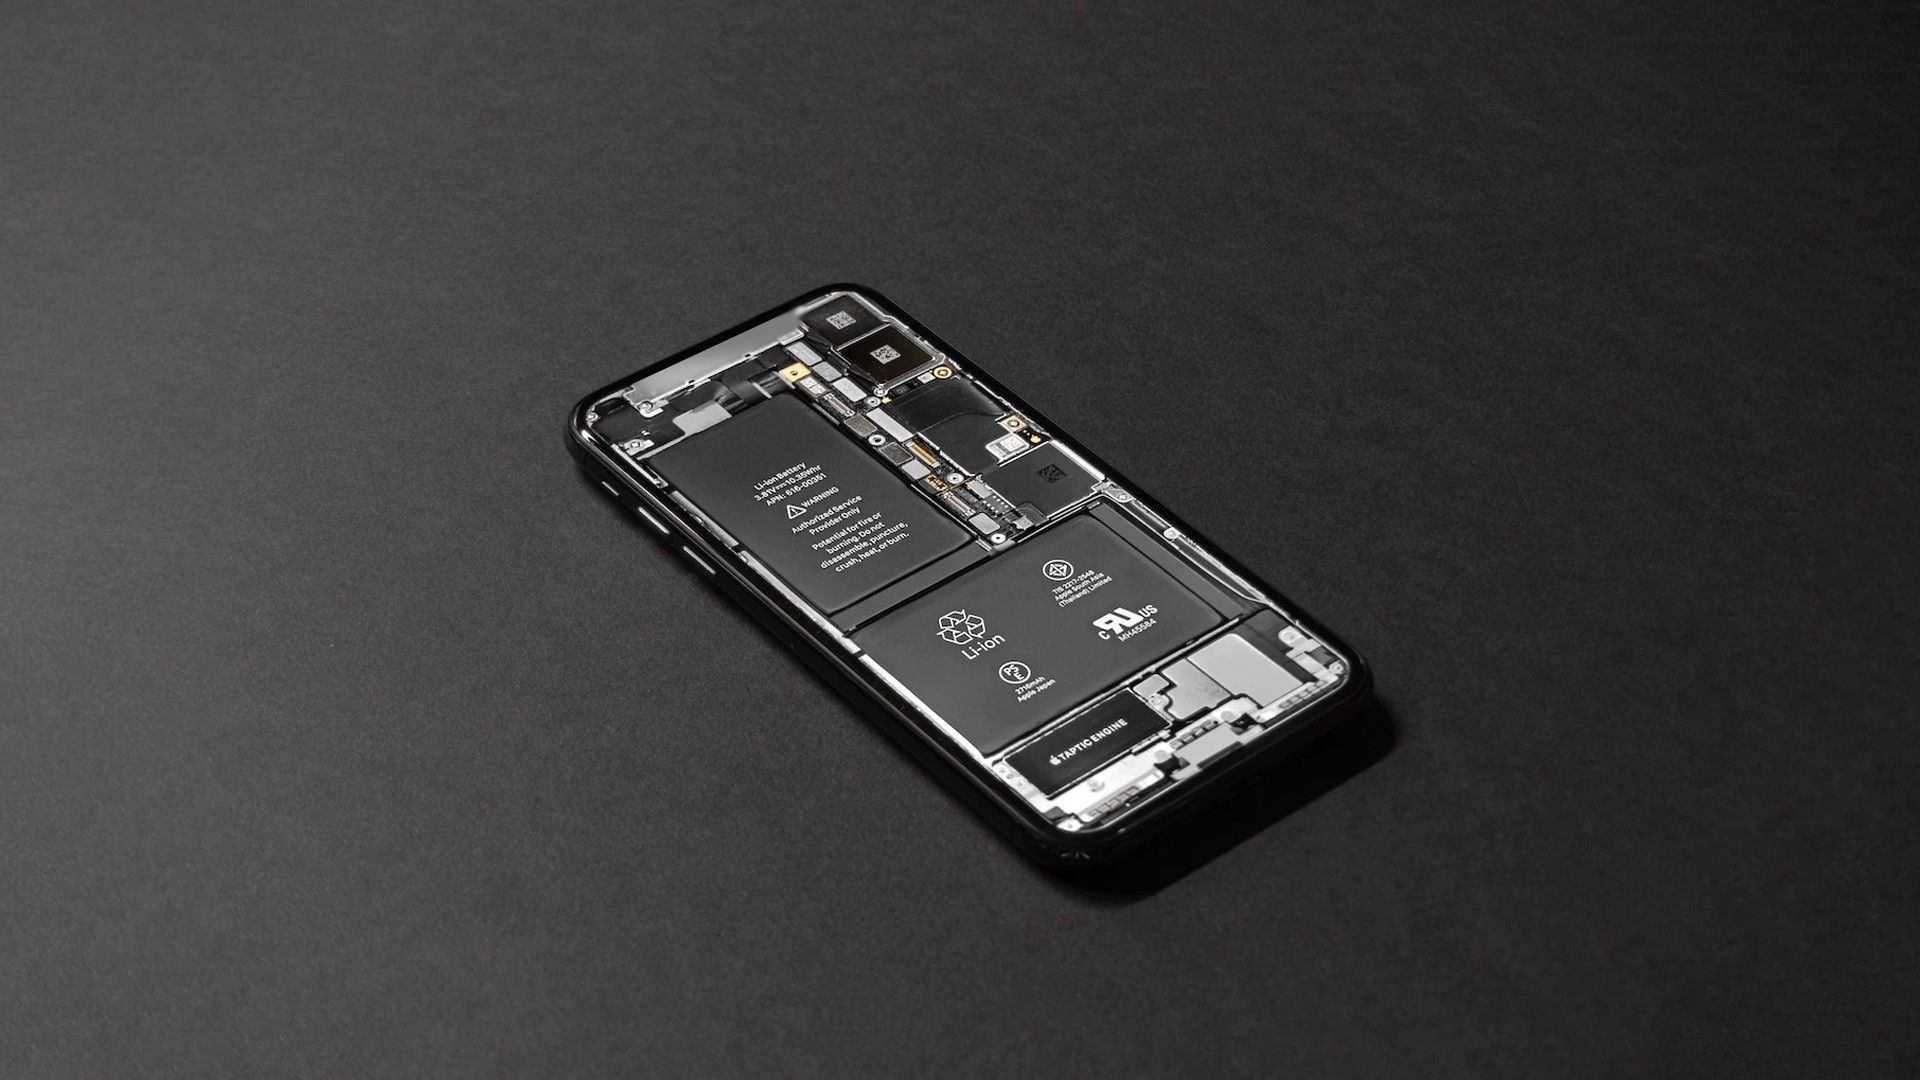 iFixit gives tips to prevent battery explosion when servicing phones, tablets and more
